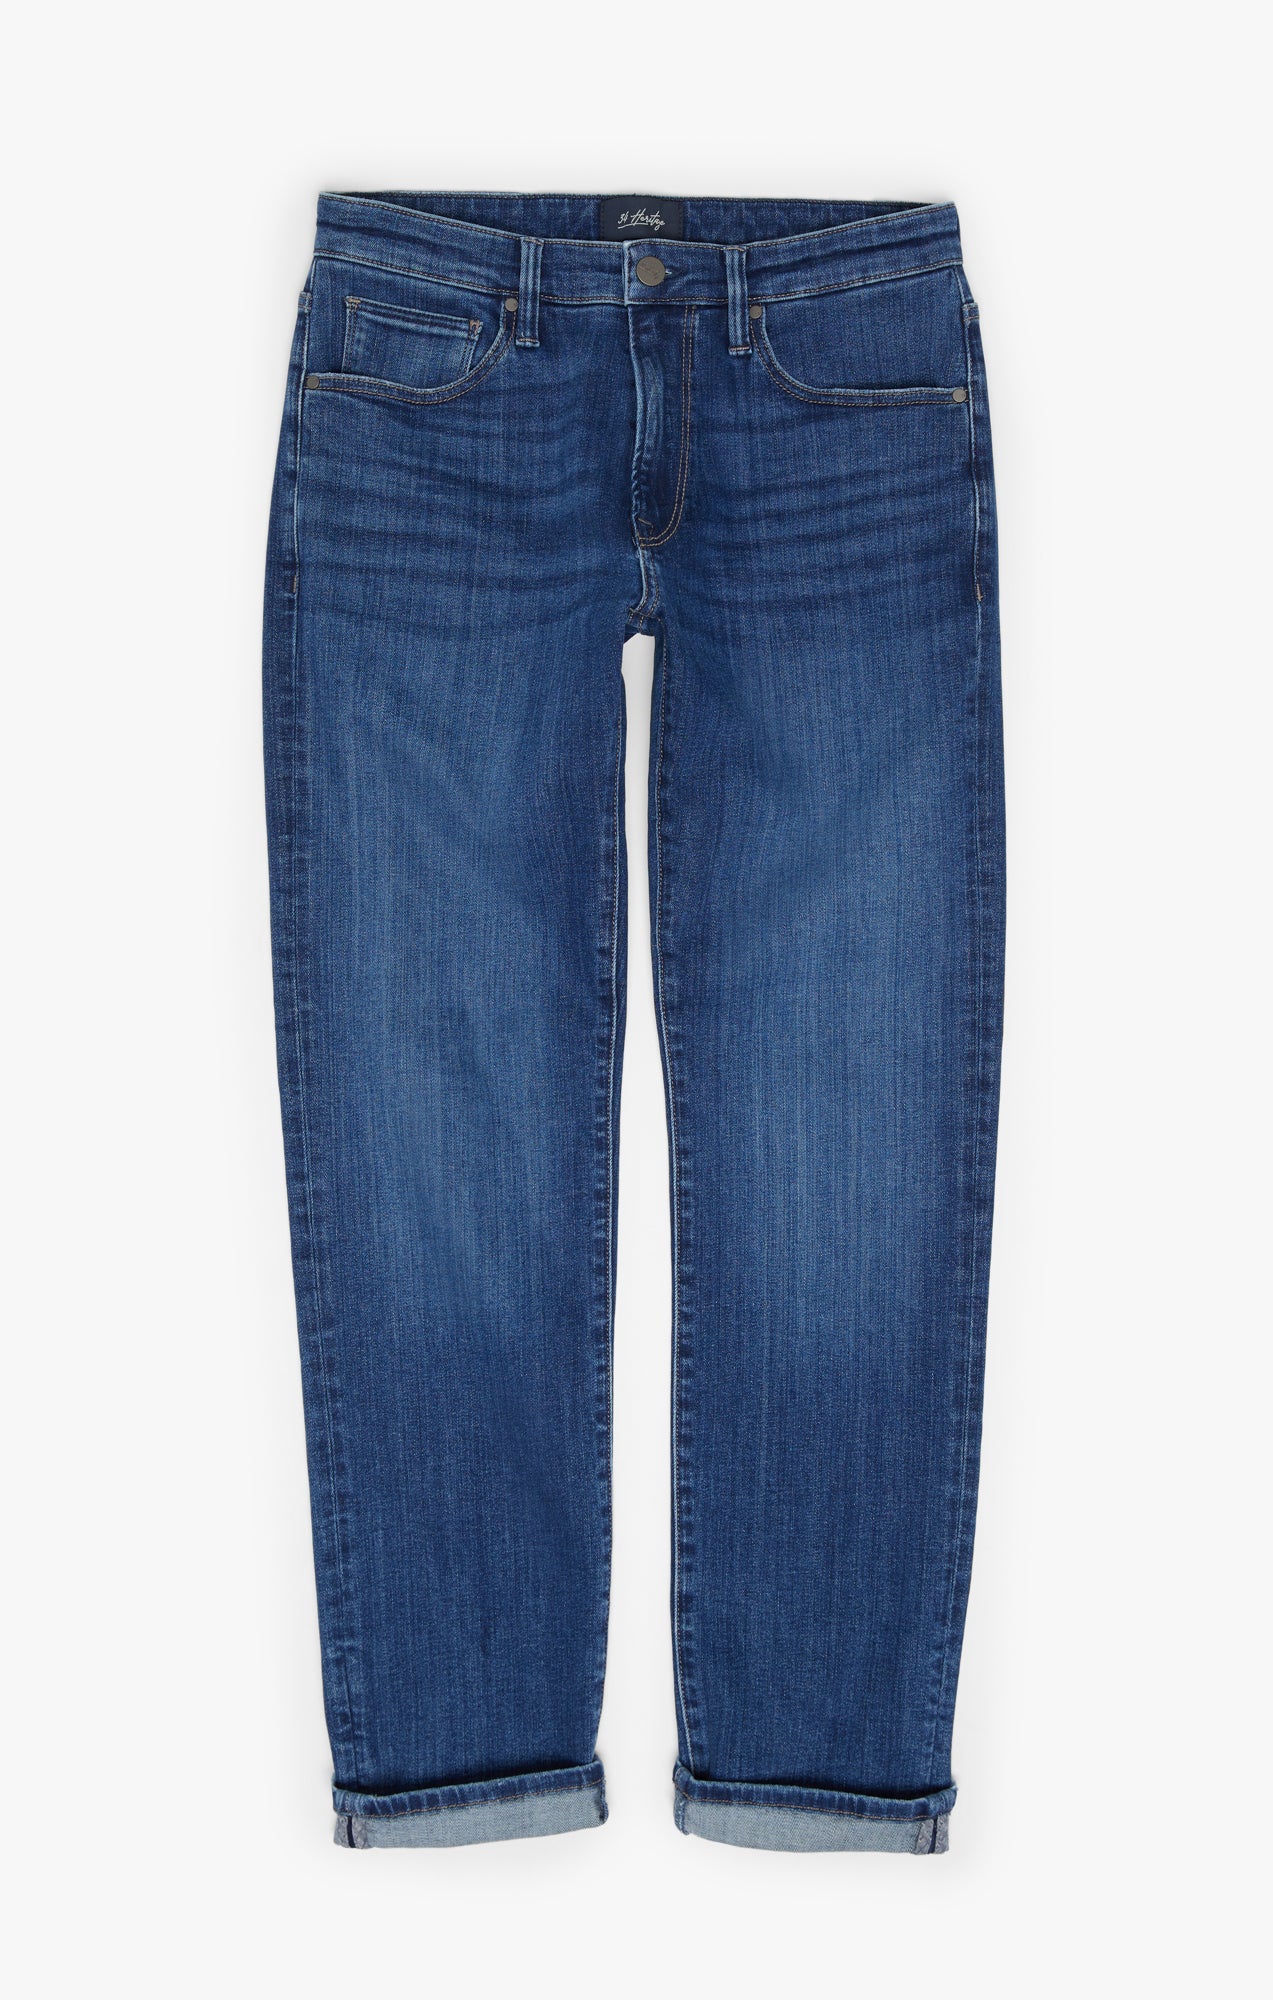 Courage Straight Leg Jeans in Deep Brushed Organic Image 7